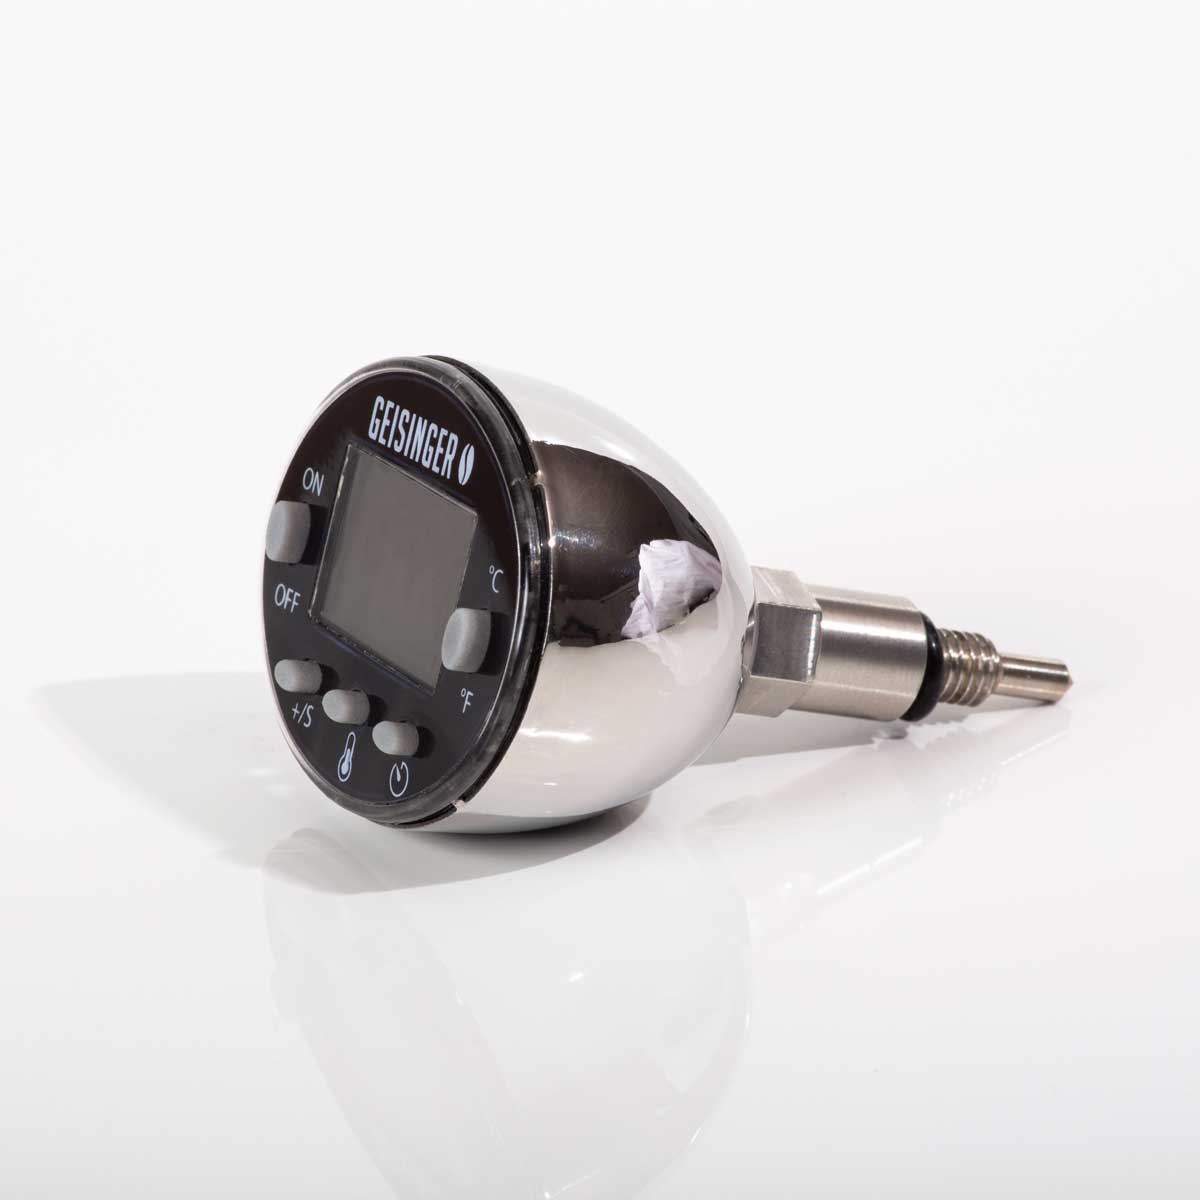 E61 Shot timer with precise thermometer, encasement polished